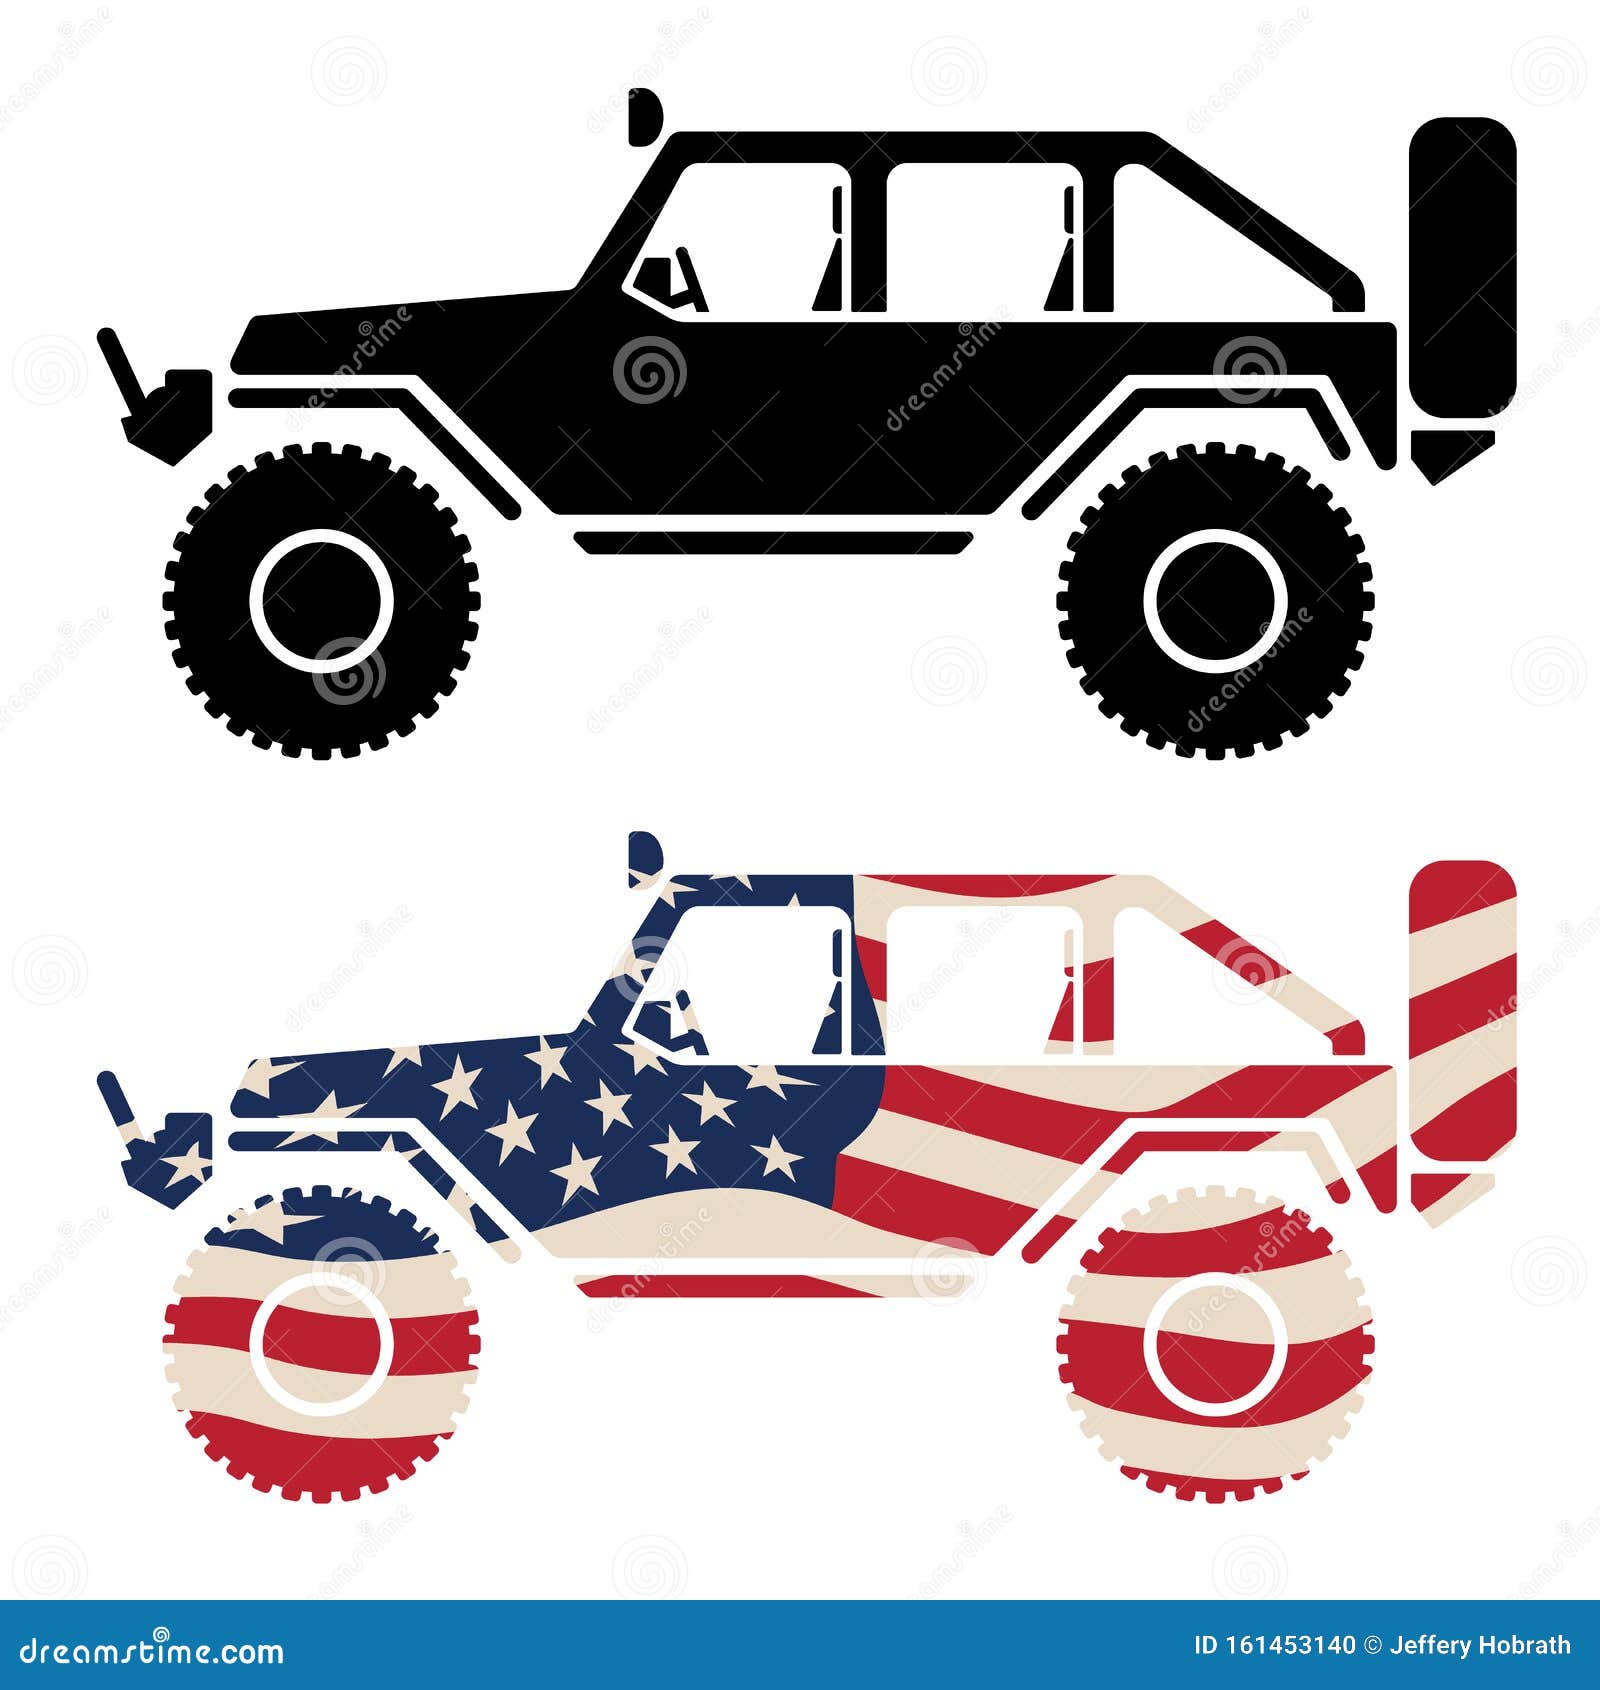 https://thumbs.dreamstime.com/z/off-road-vehicle-usa-flag-black-isolated-vector-illustration-sharp-lifted-offroad-rock-crawler-big-tires-clean-161453140.jpg